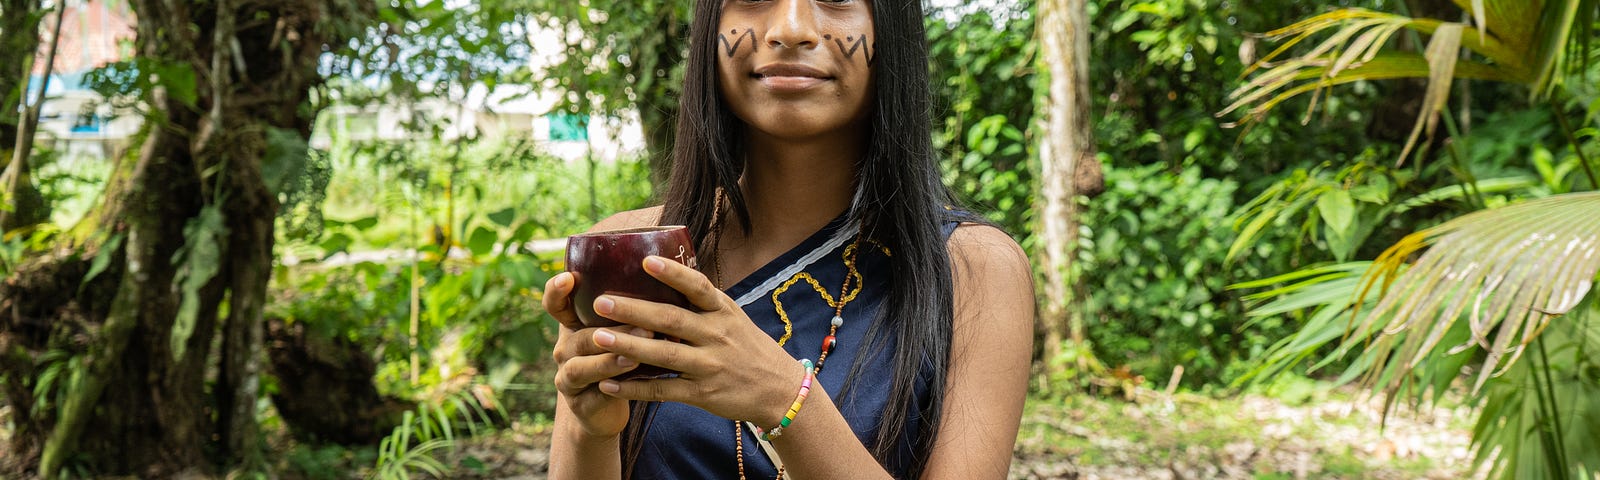 Amazon indigenous young woman in traditional clothing holding a cup and surrounded by nature.